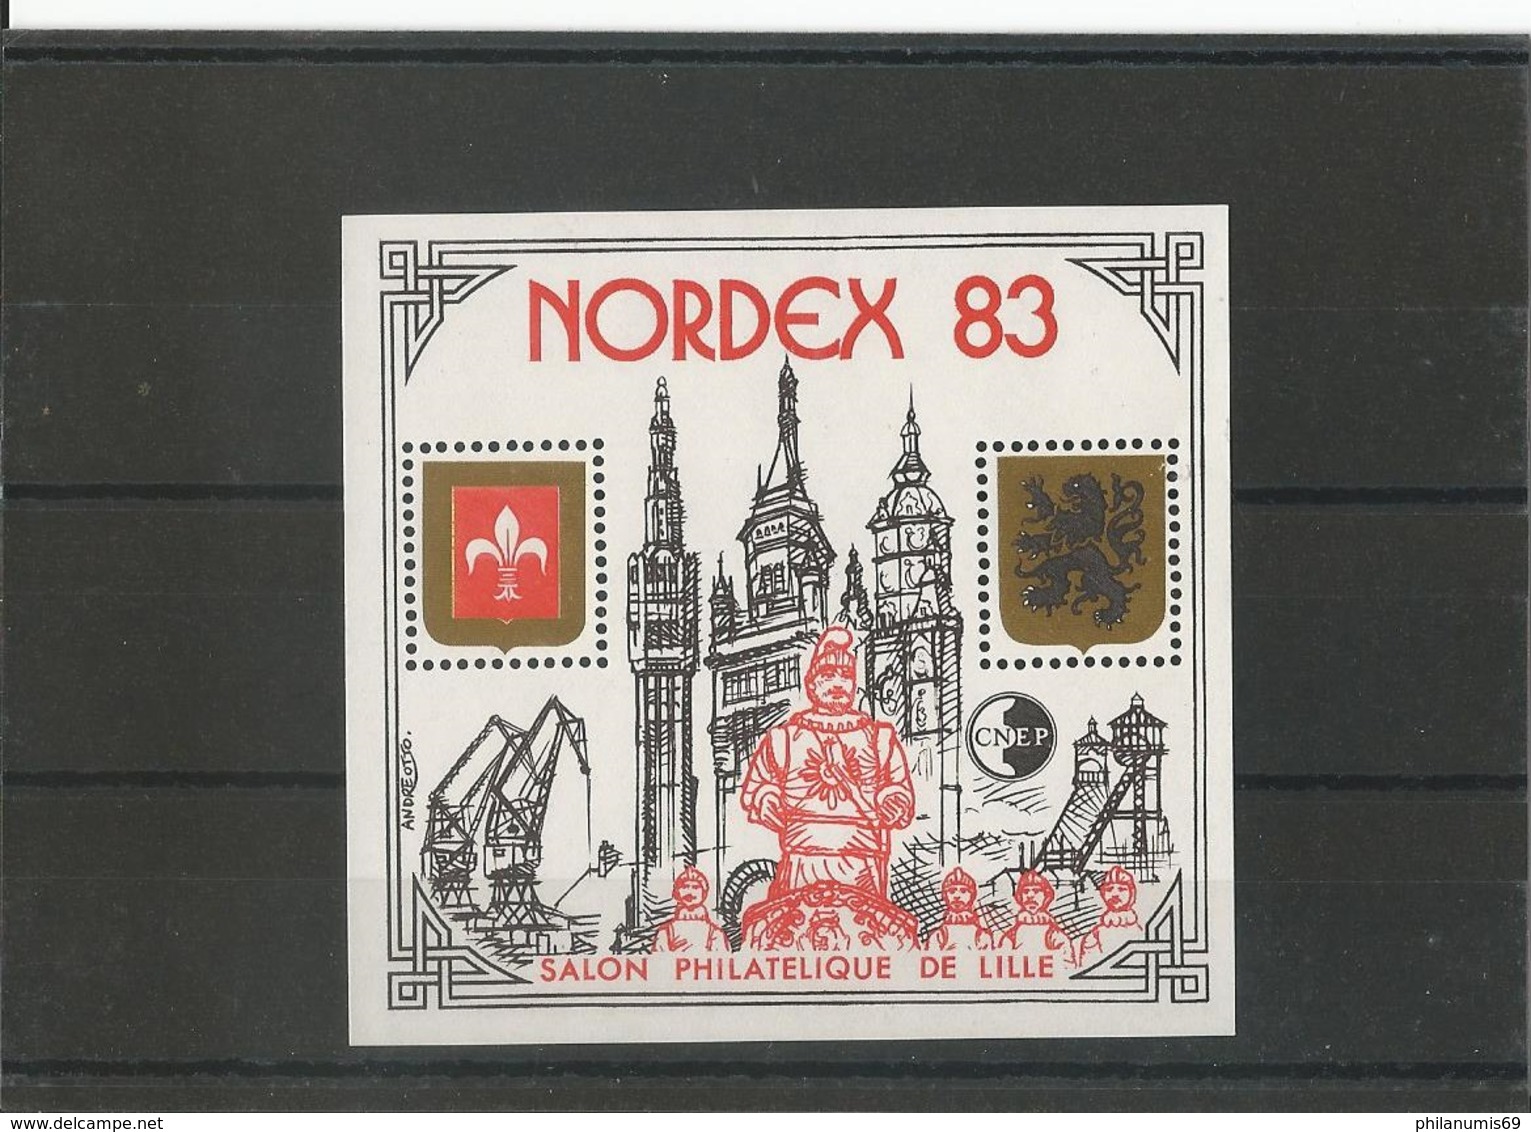 FRANCE 1983 - YT 4 - NEUF SANS CHARNIERE ** (MNH) GOMME D'ORIGINE LUXE - CNEP